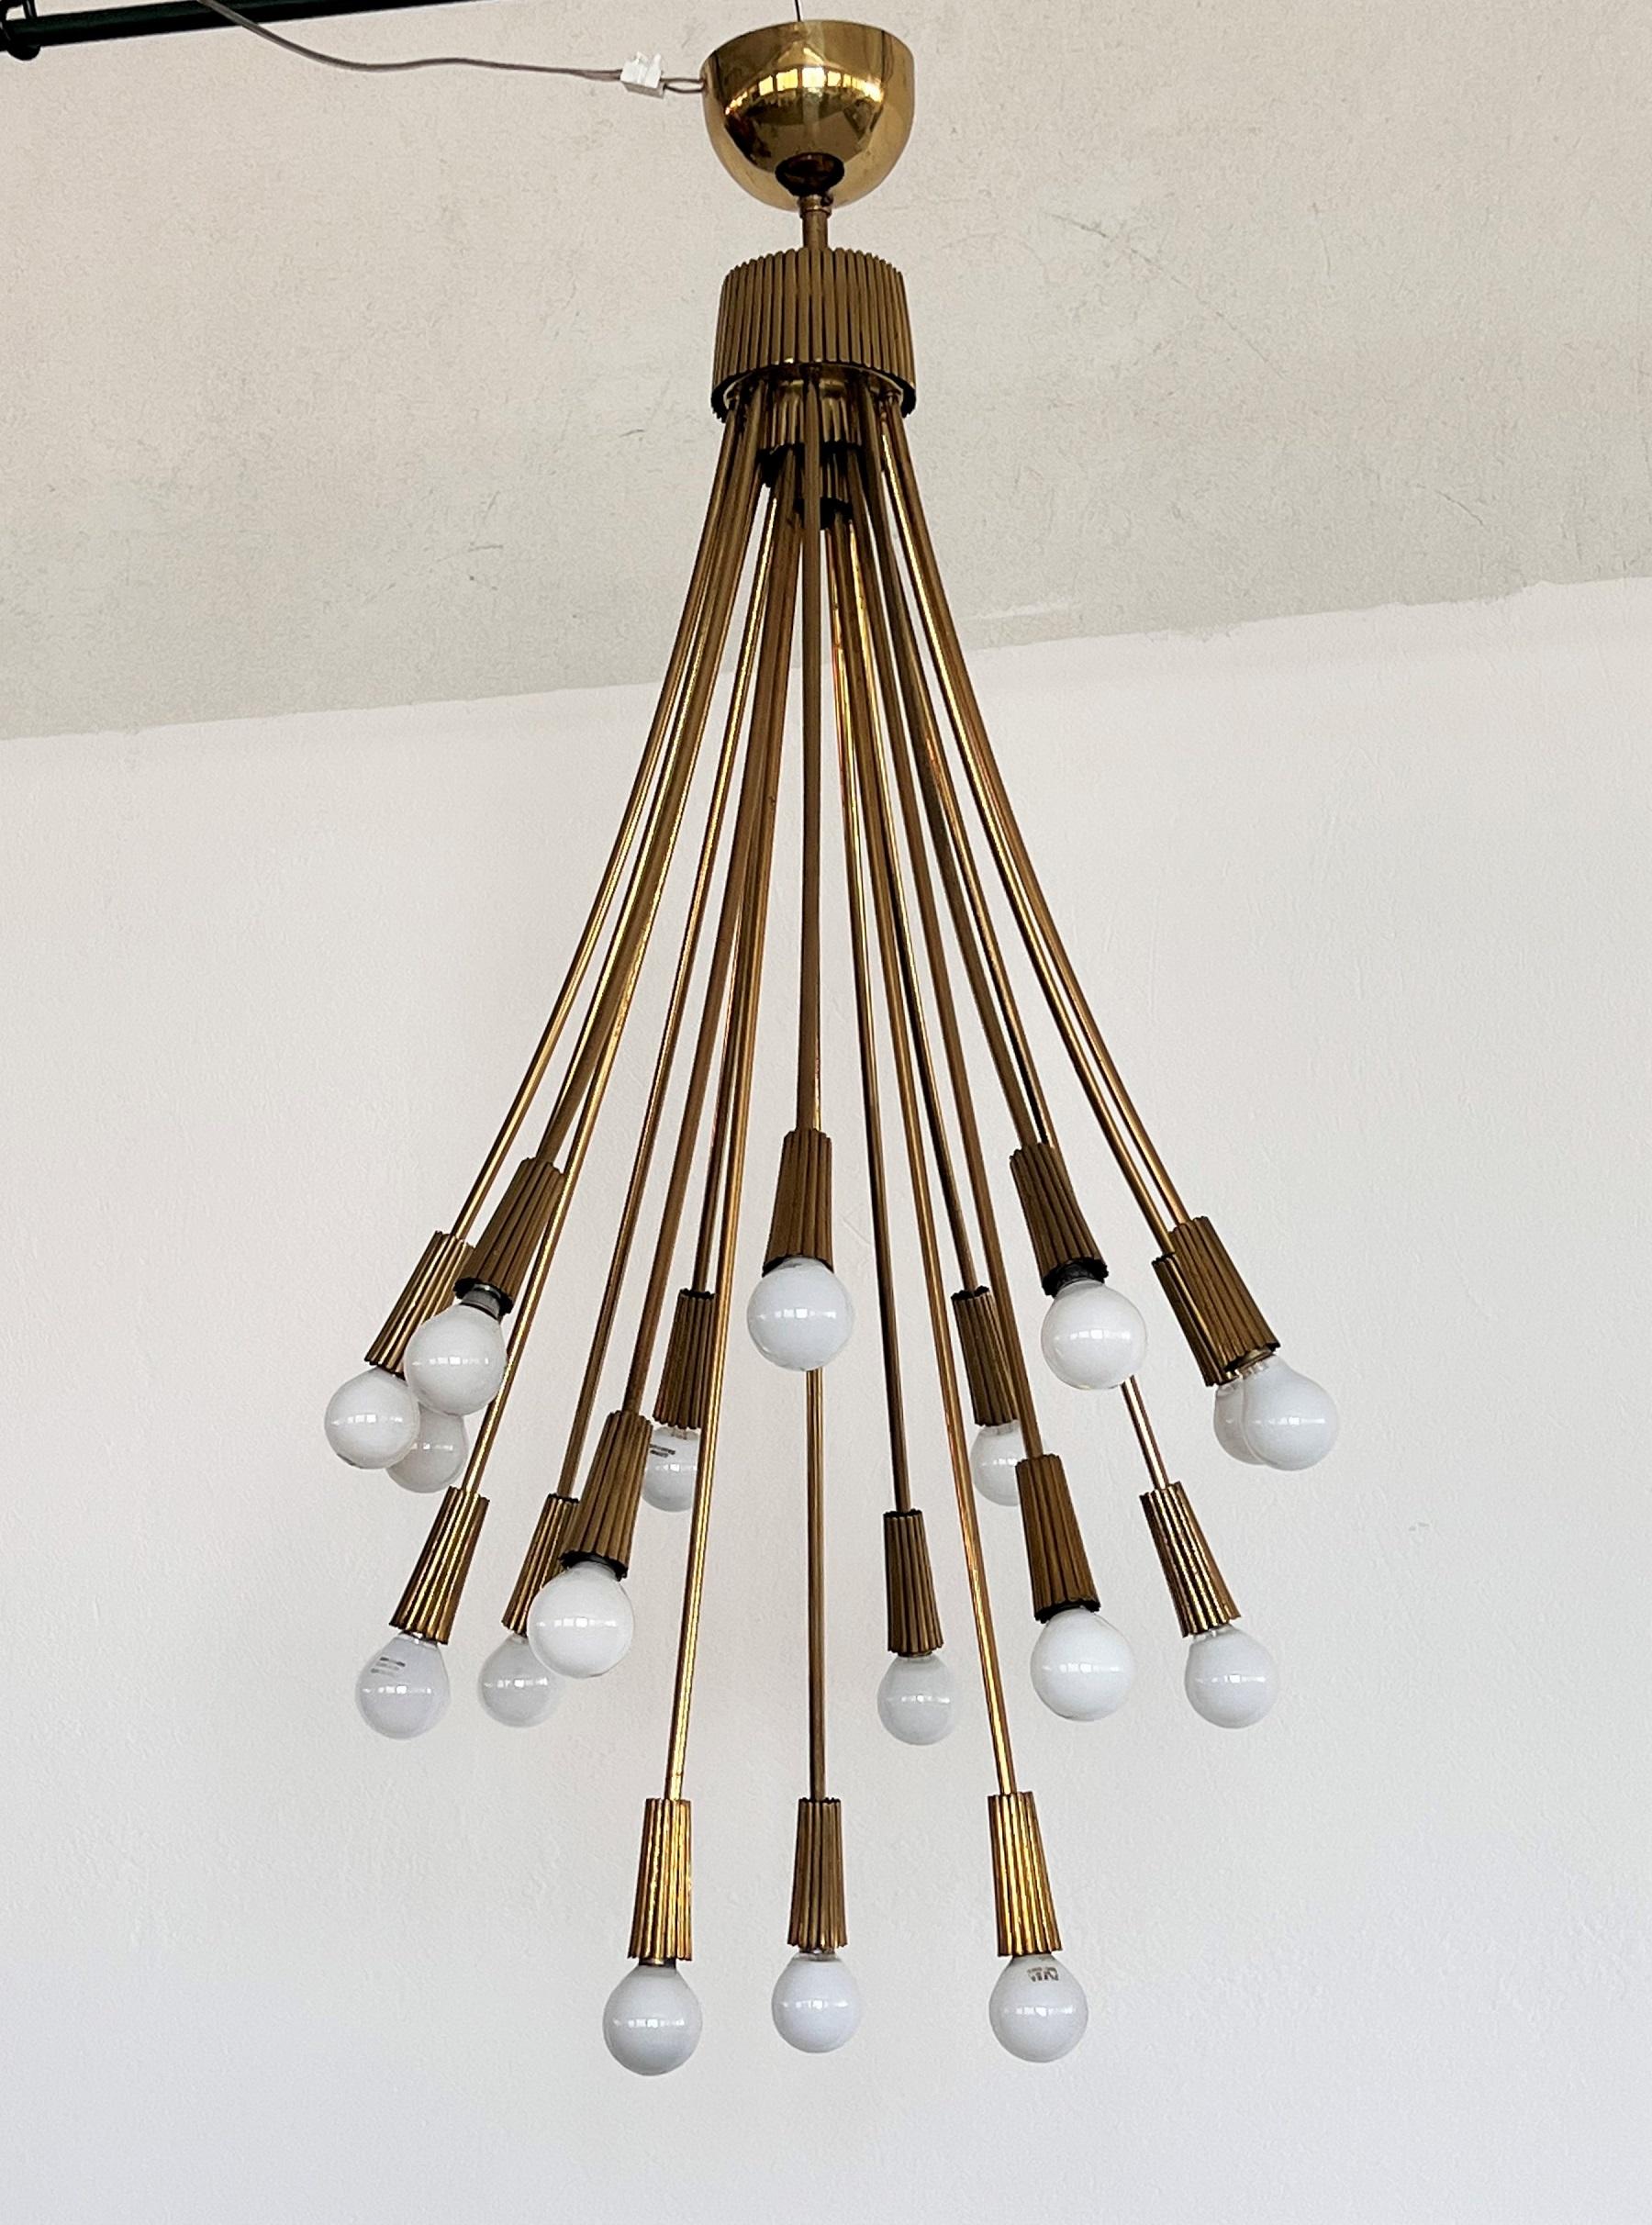 Italian Chandelier in Brass with 18 Lights, 1970s For Sale 9